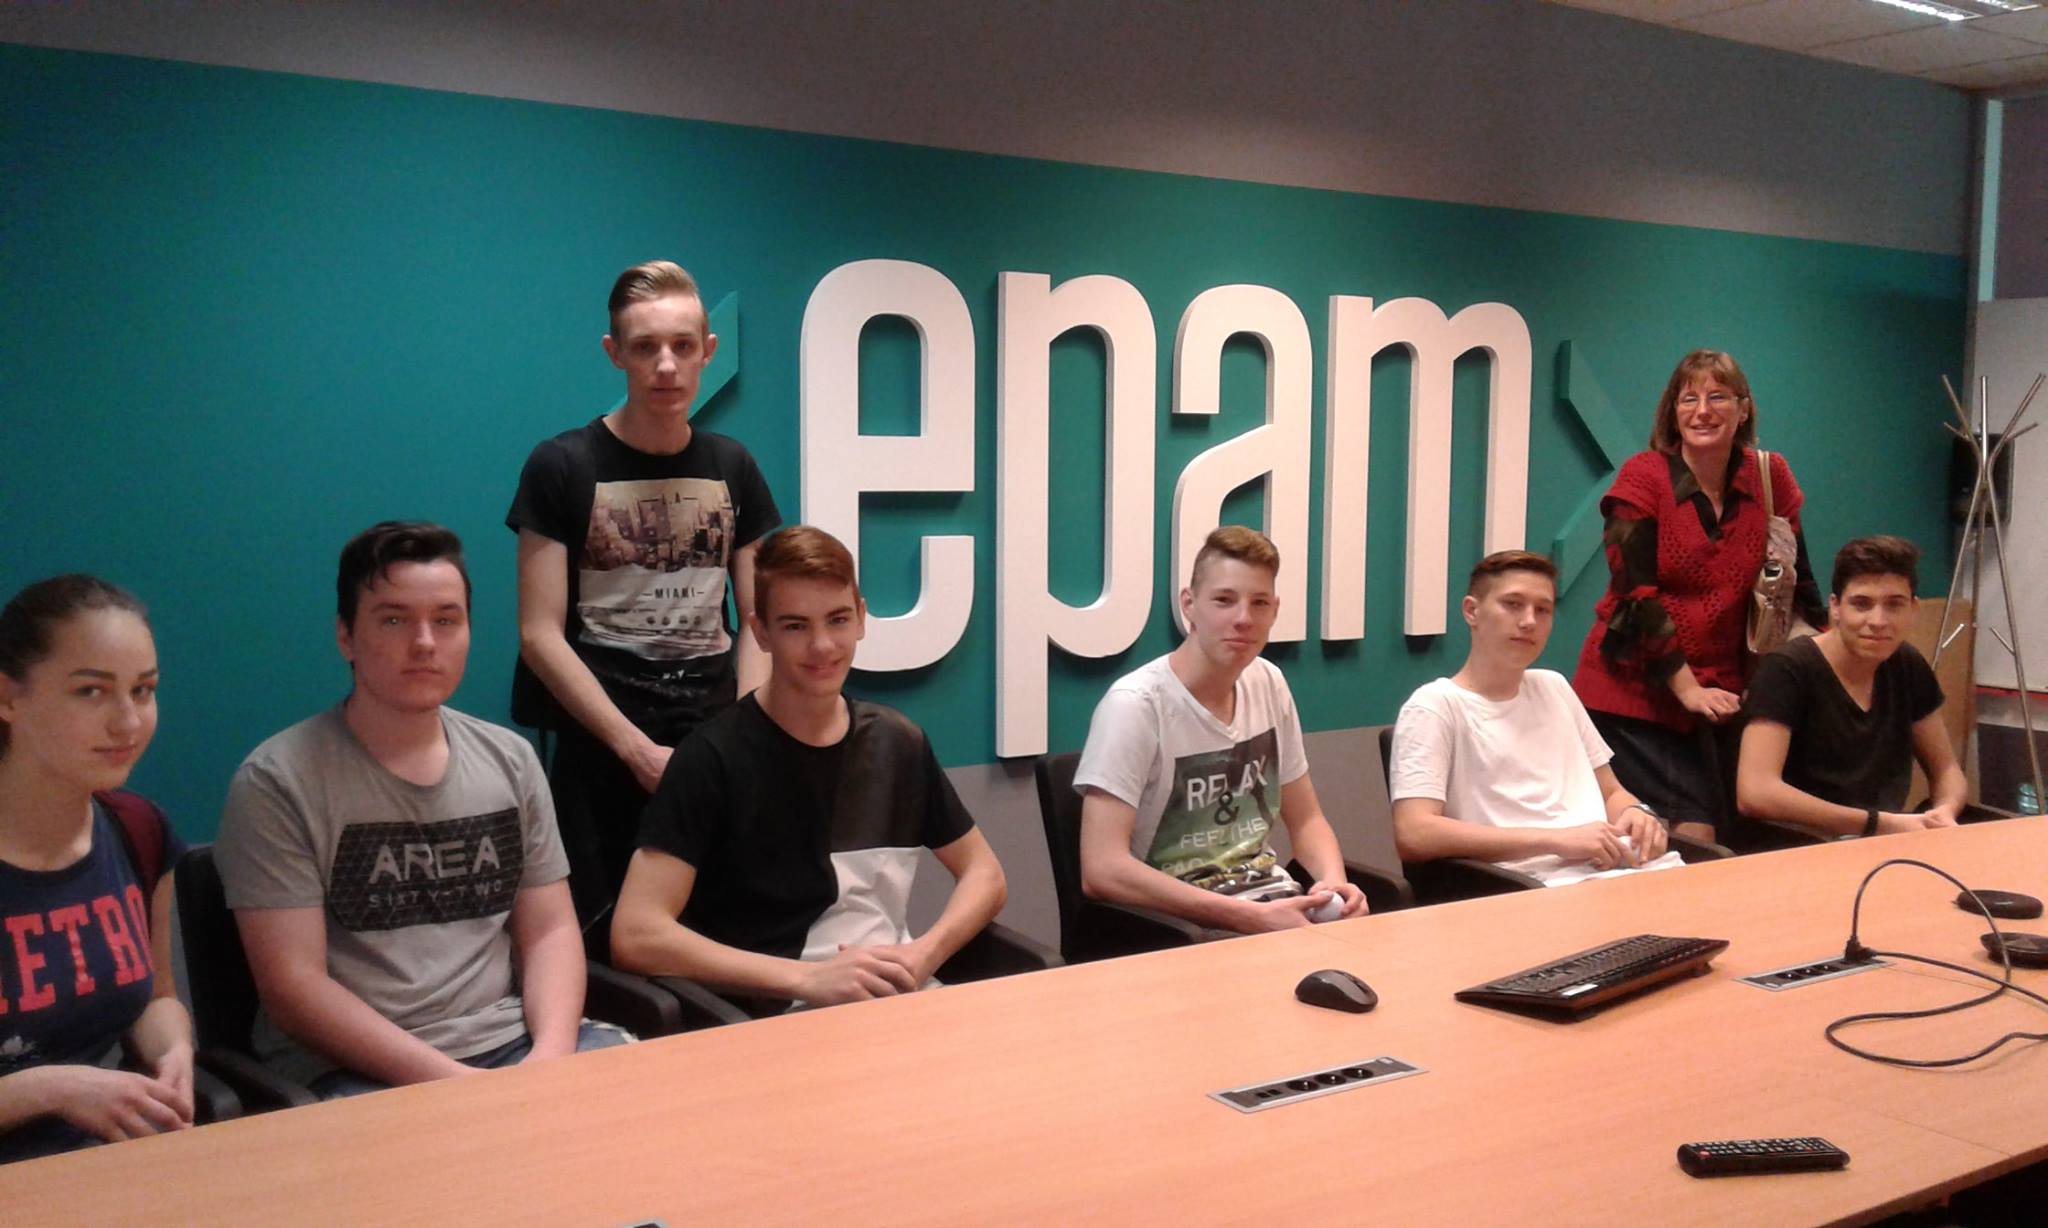 EPAM Engages 1,500 Students in Coding Activities